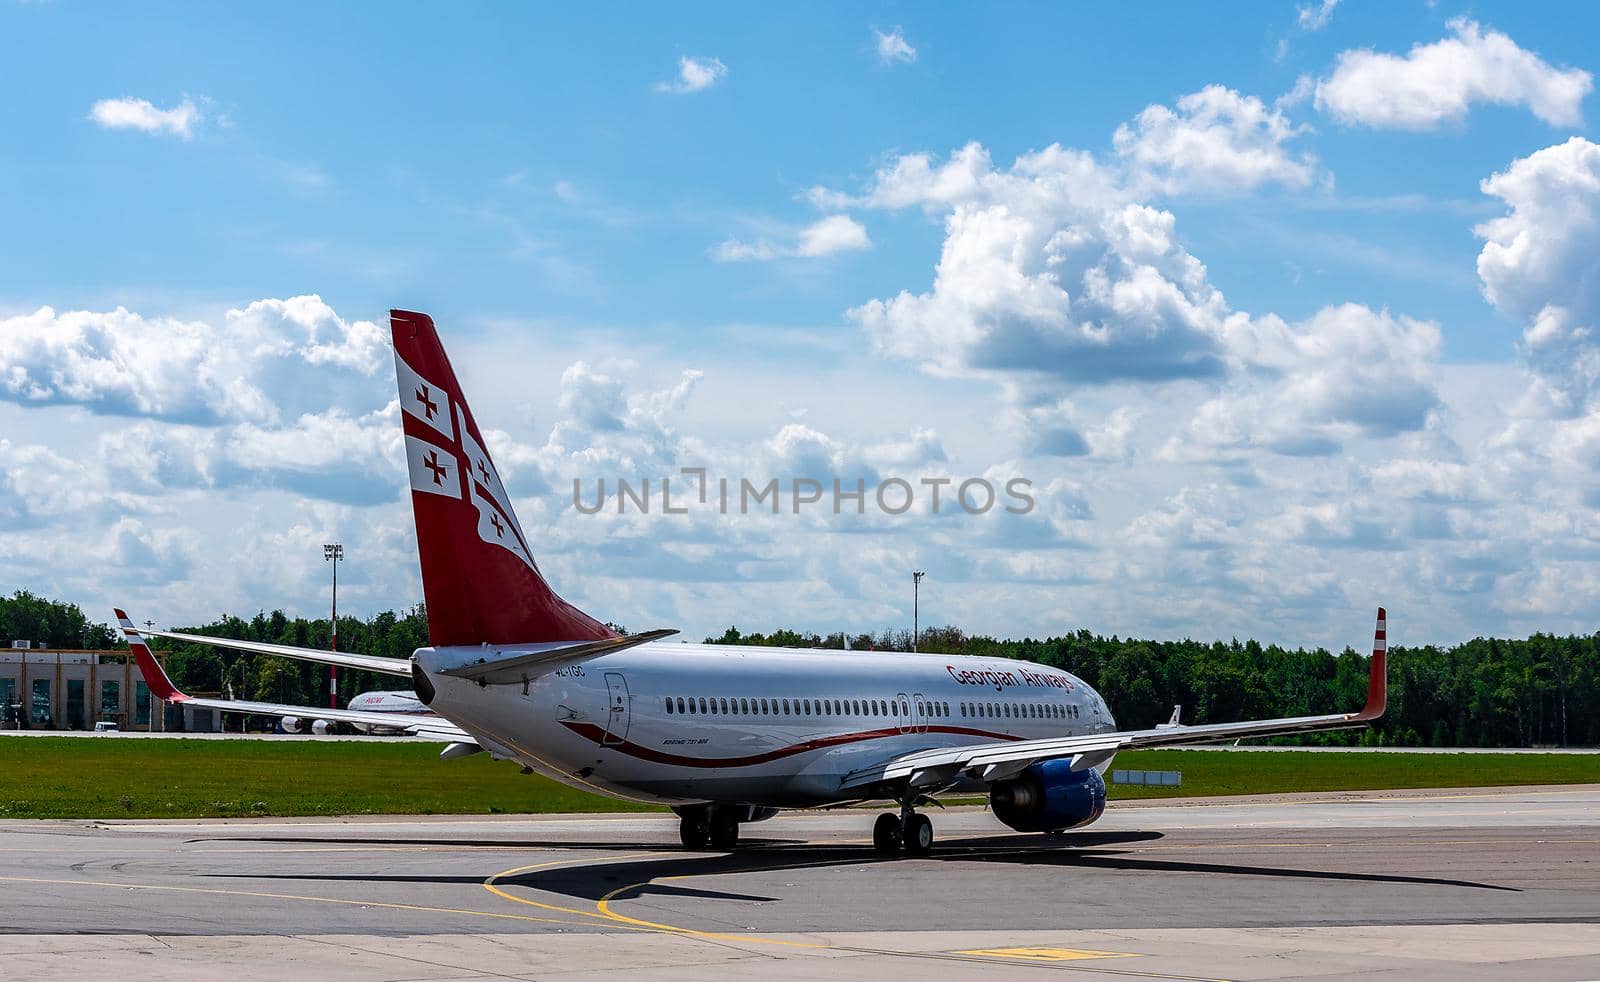 July 2, 2019, Moscow, Russia. Airplane Boeing 737-800 Airzena Georgian Airways at Vnukovo airport in Moscow.